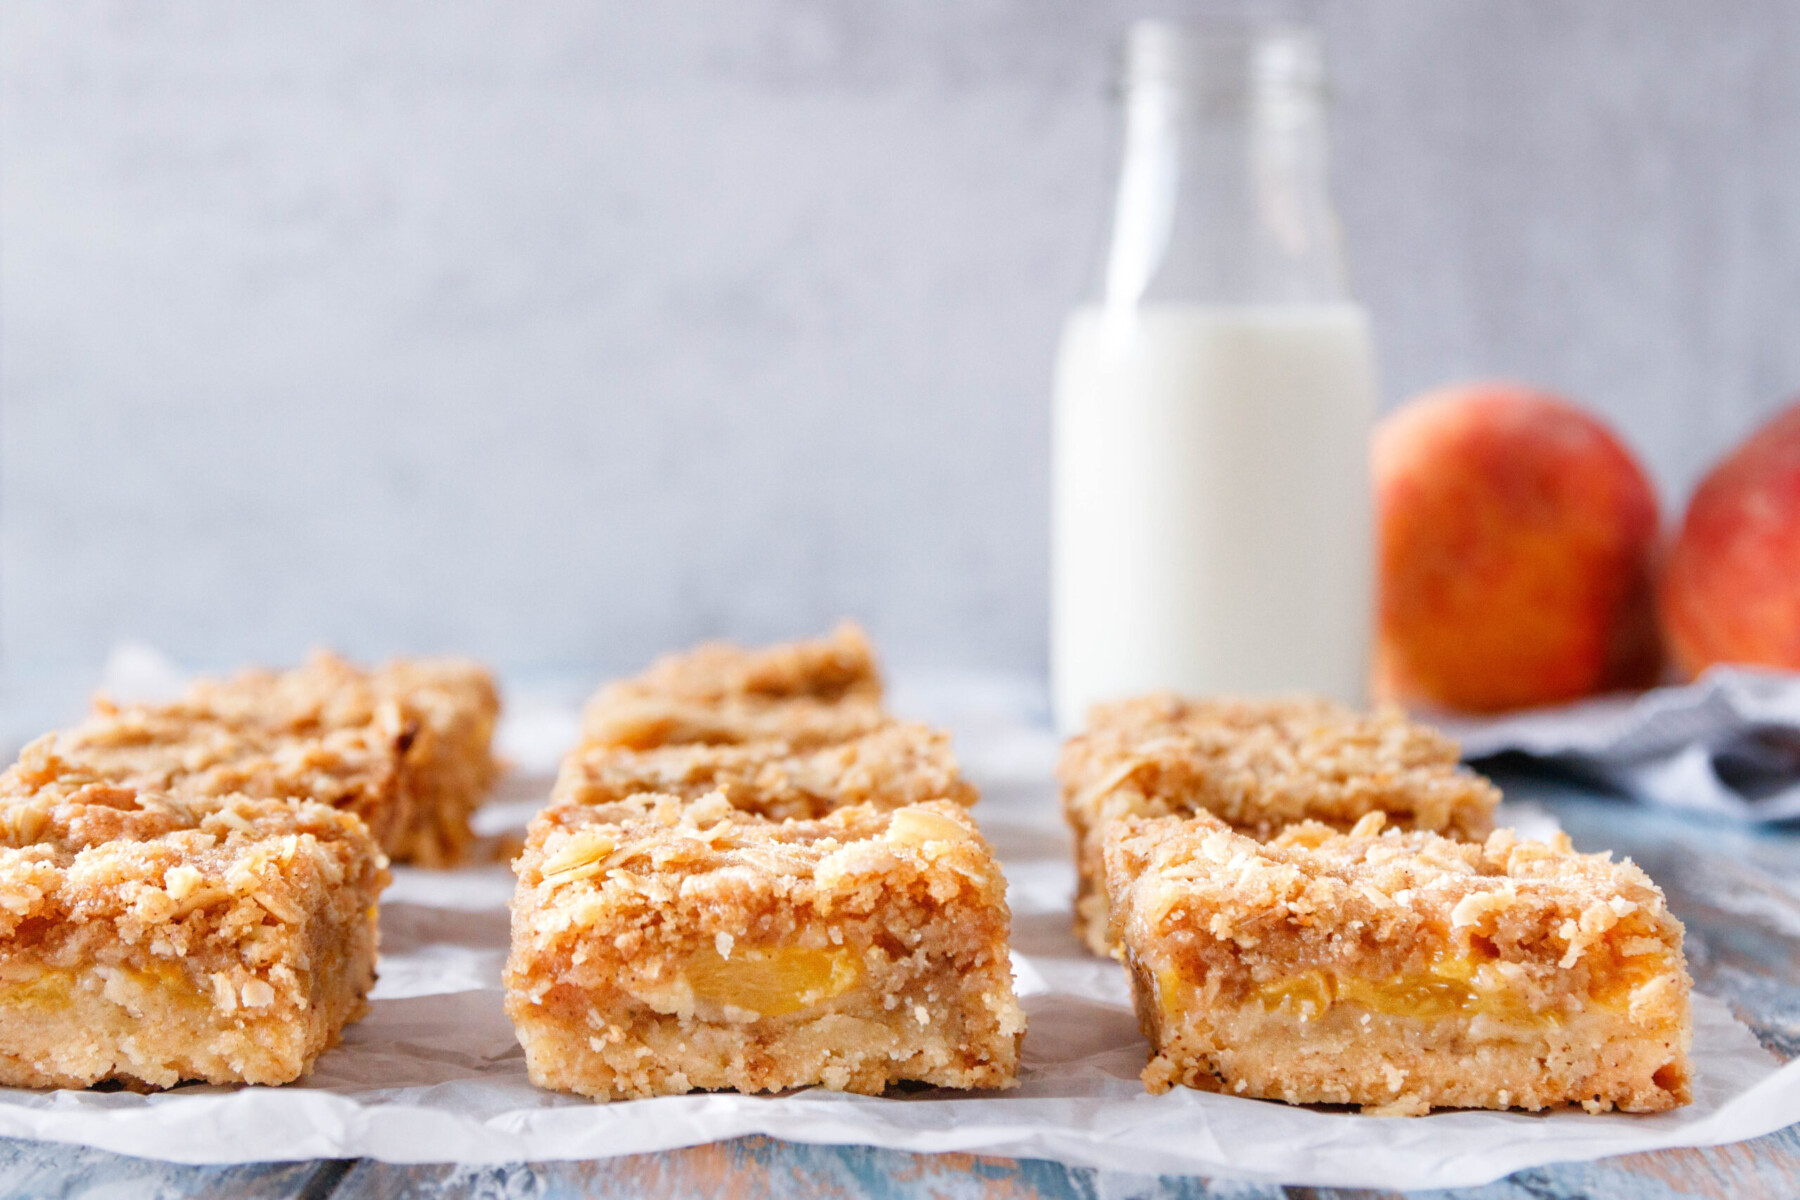 close up of the bars arranged in a single layer and sliced so you can see the base, peach, and crumb layers